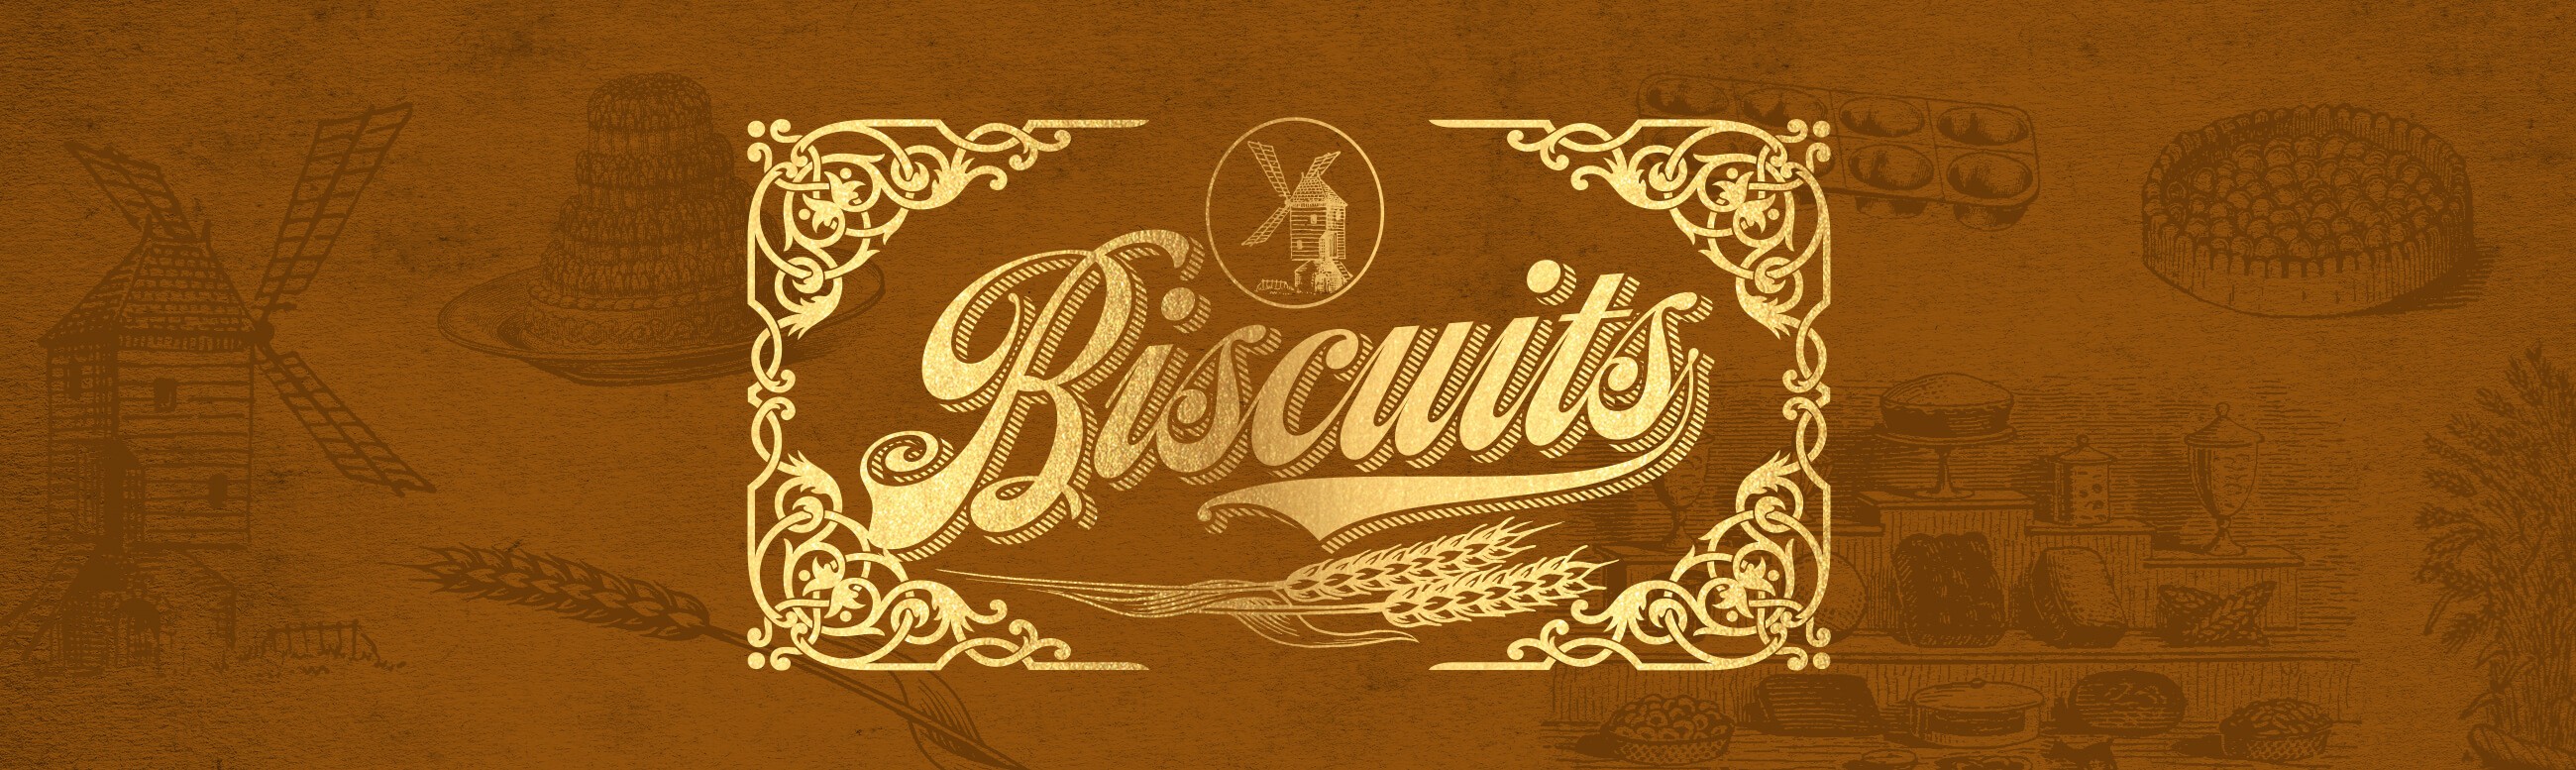 Our famous biscuits